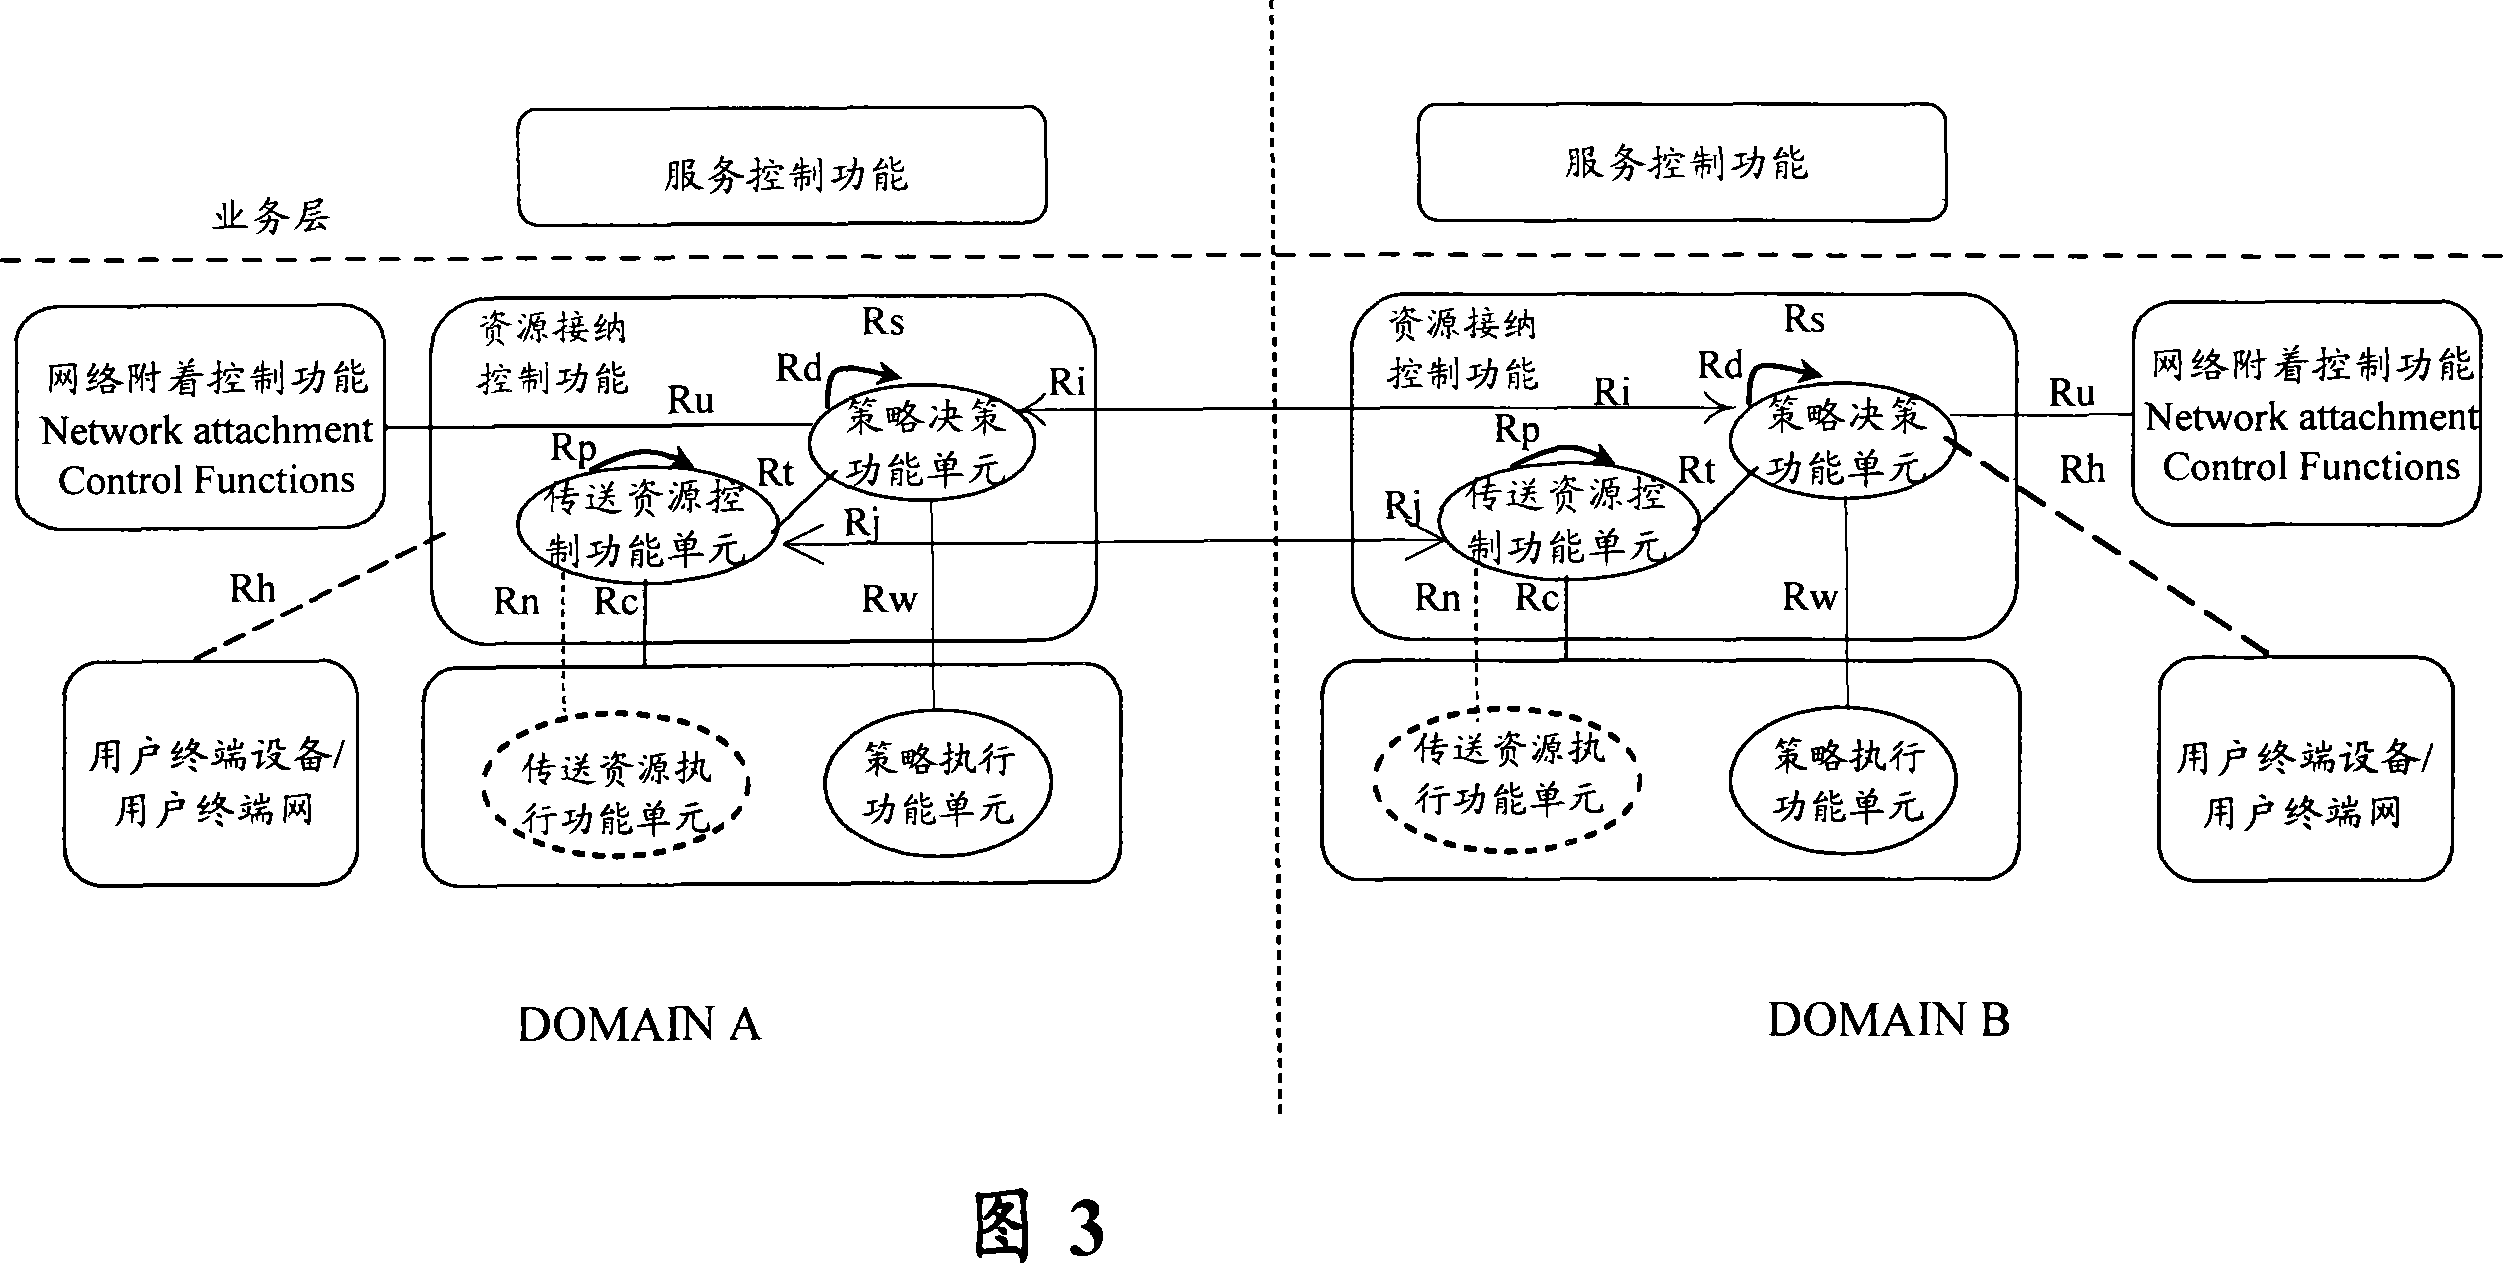 Method for cross-domain communication between resource control function units